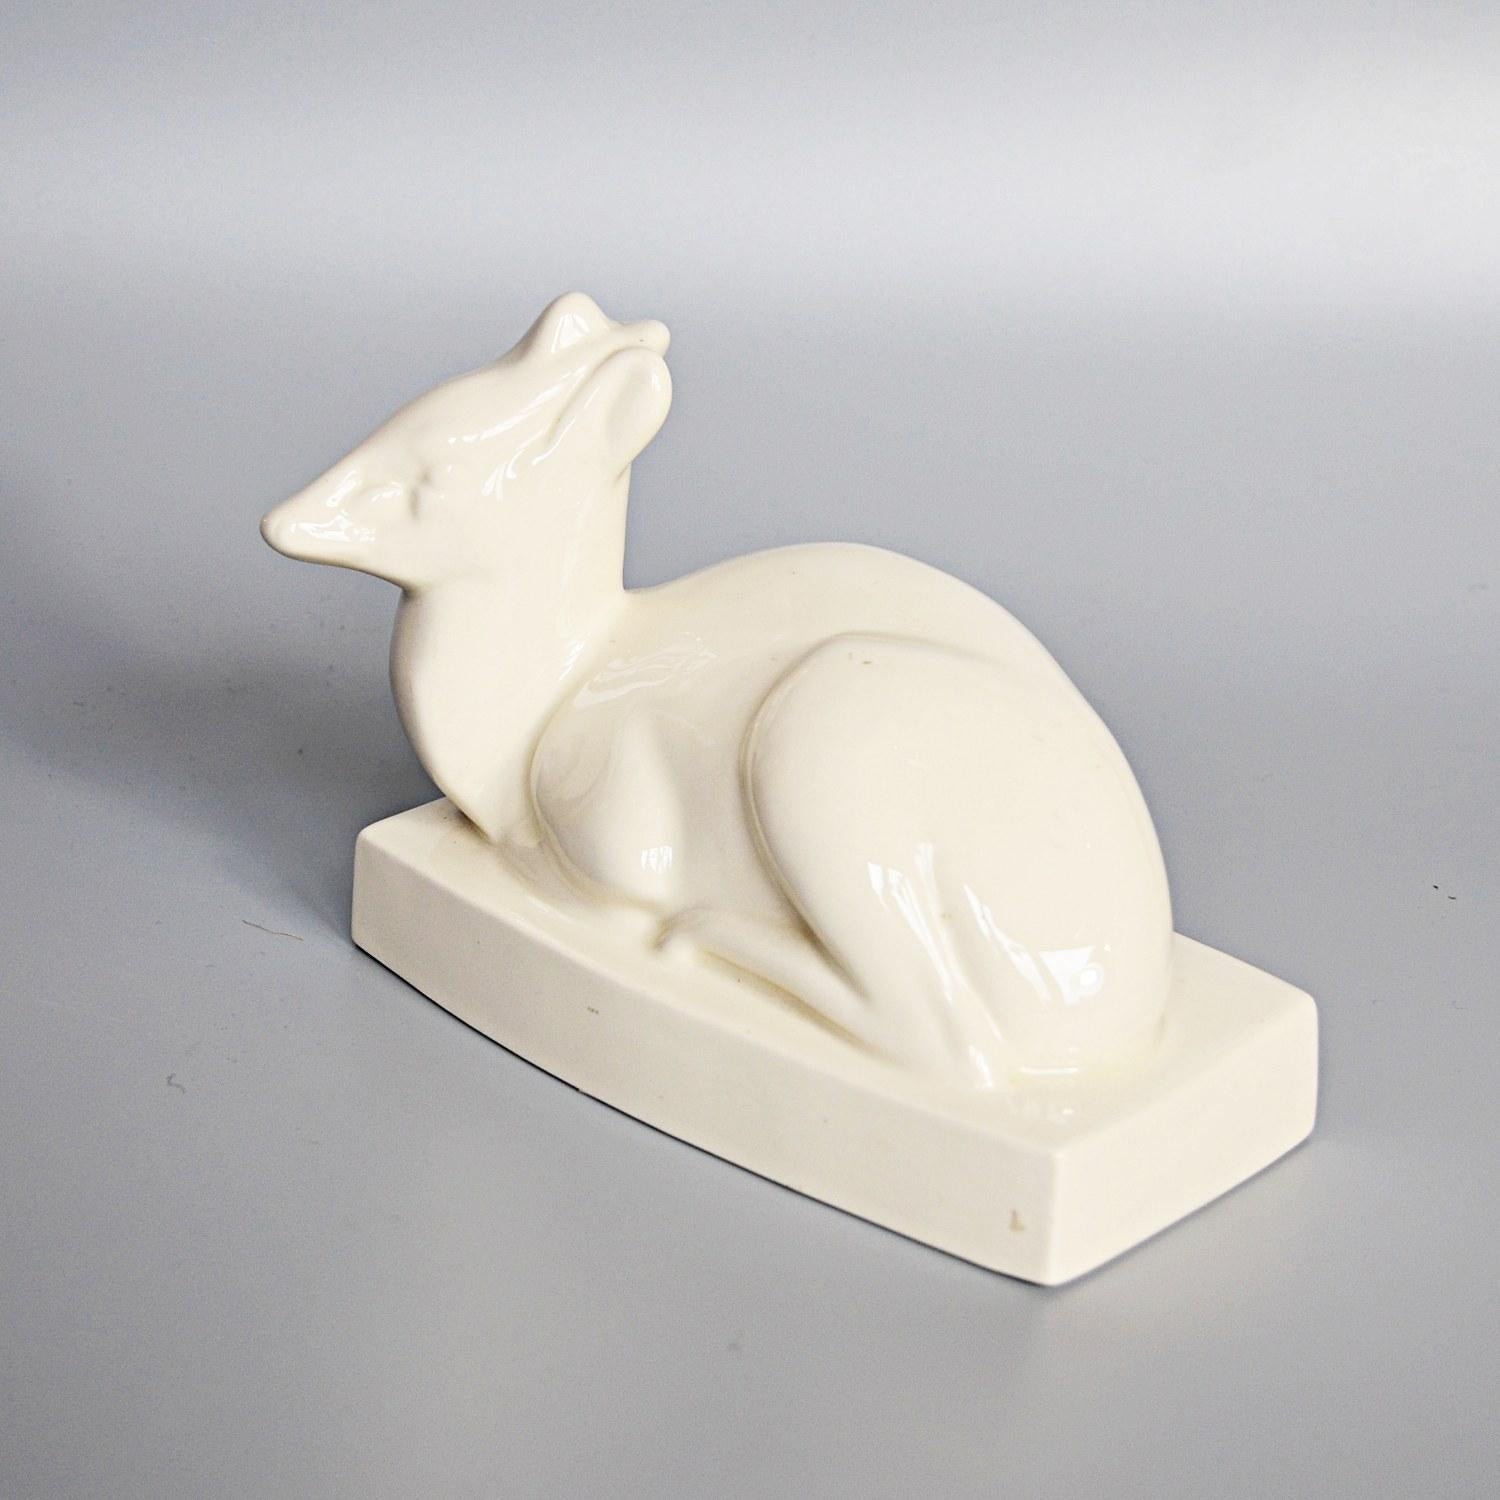 An earthenware model of a Duiker by John Skeaping for Wedgwood. Cream glazed with printed Wedgwood marks to underneath. 

Dimensions: H 12cm, W 18cm, D 10cm 

Origin: English

Date: circa 1960

Item number: 2409205.